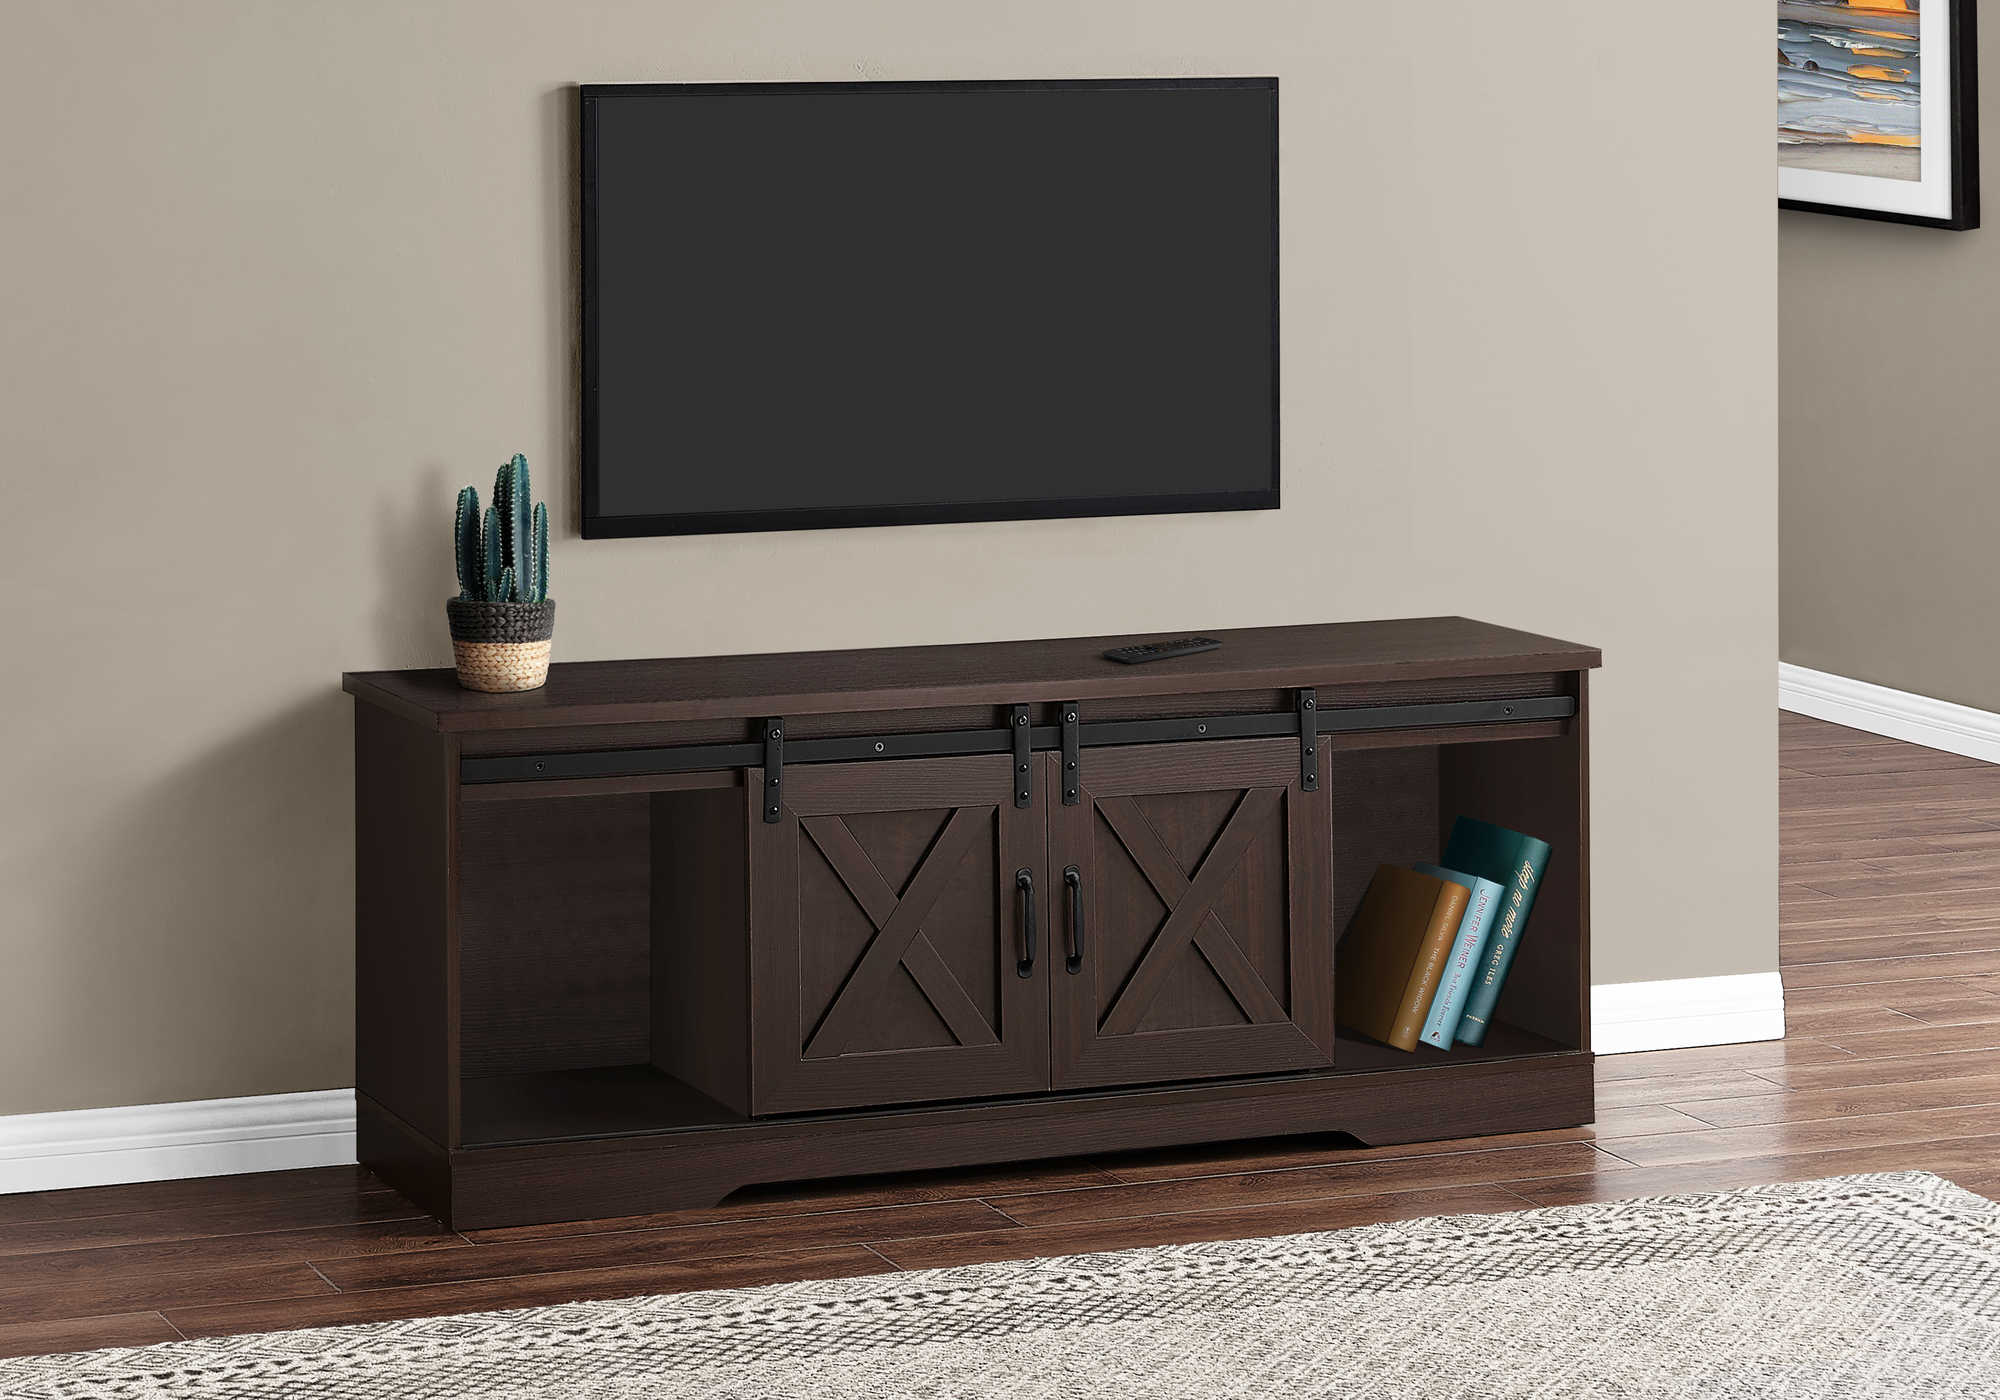 TV STAND - 60"L / ESPRESSO WITH 2 SLIDING DOORS